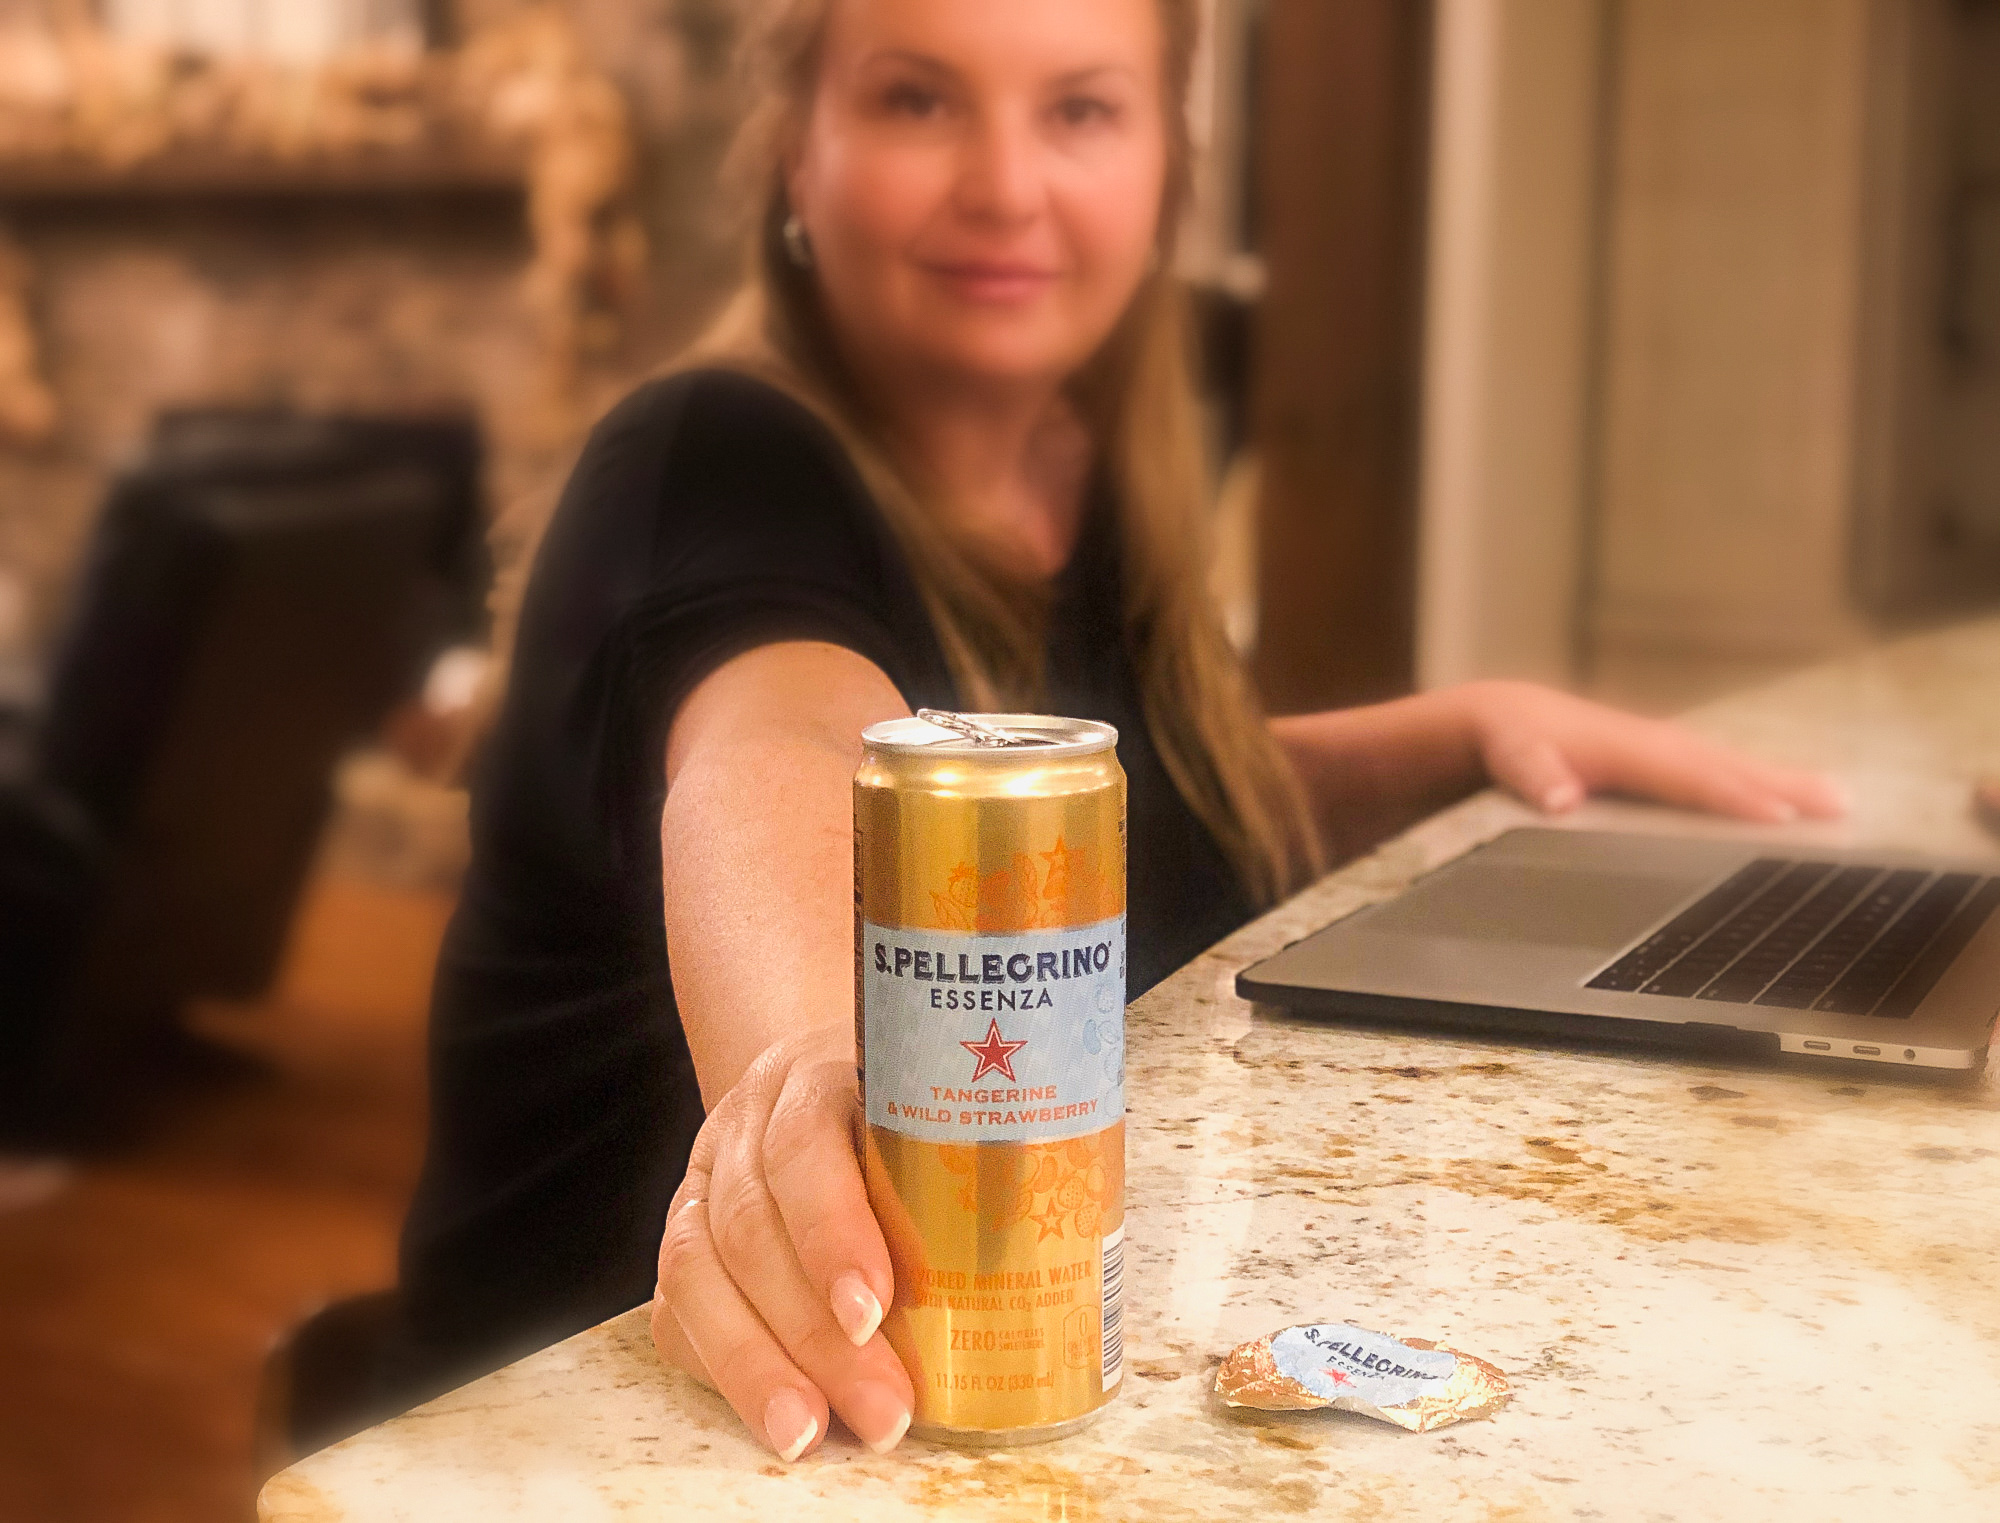 Add A Tasty Twist Without Adding Any Calories - Pick Up S.Pellegrino Essenza At Your Local Publix on I Heart Publix